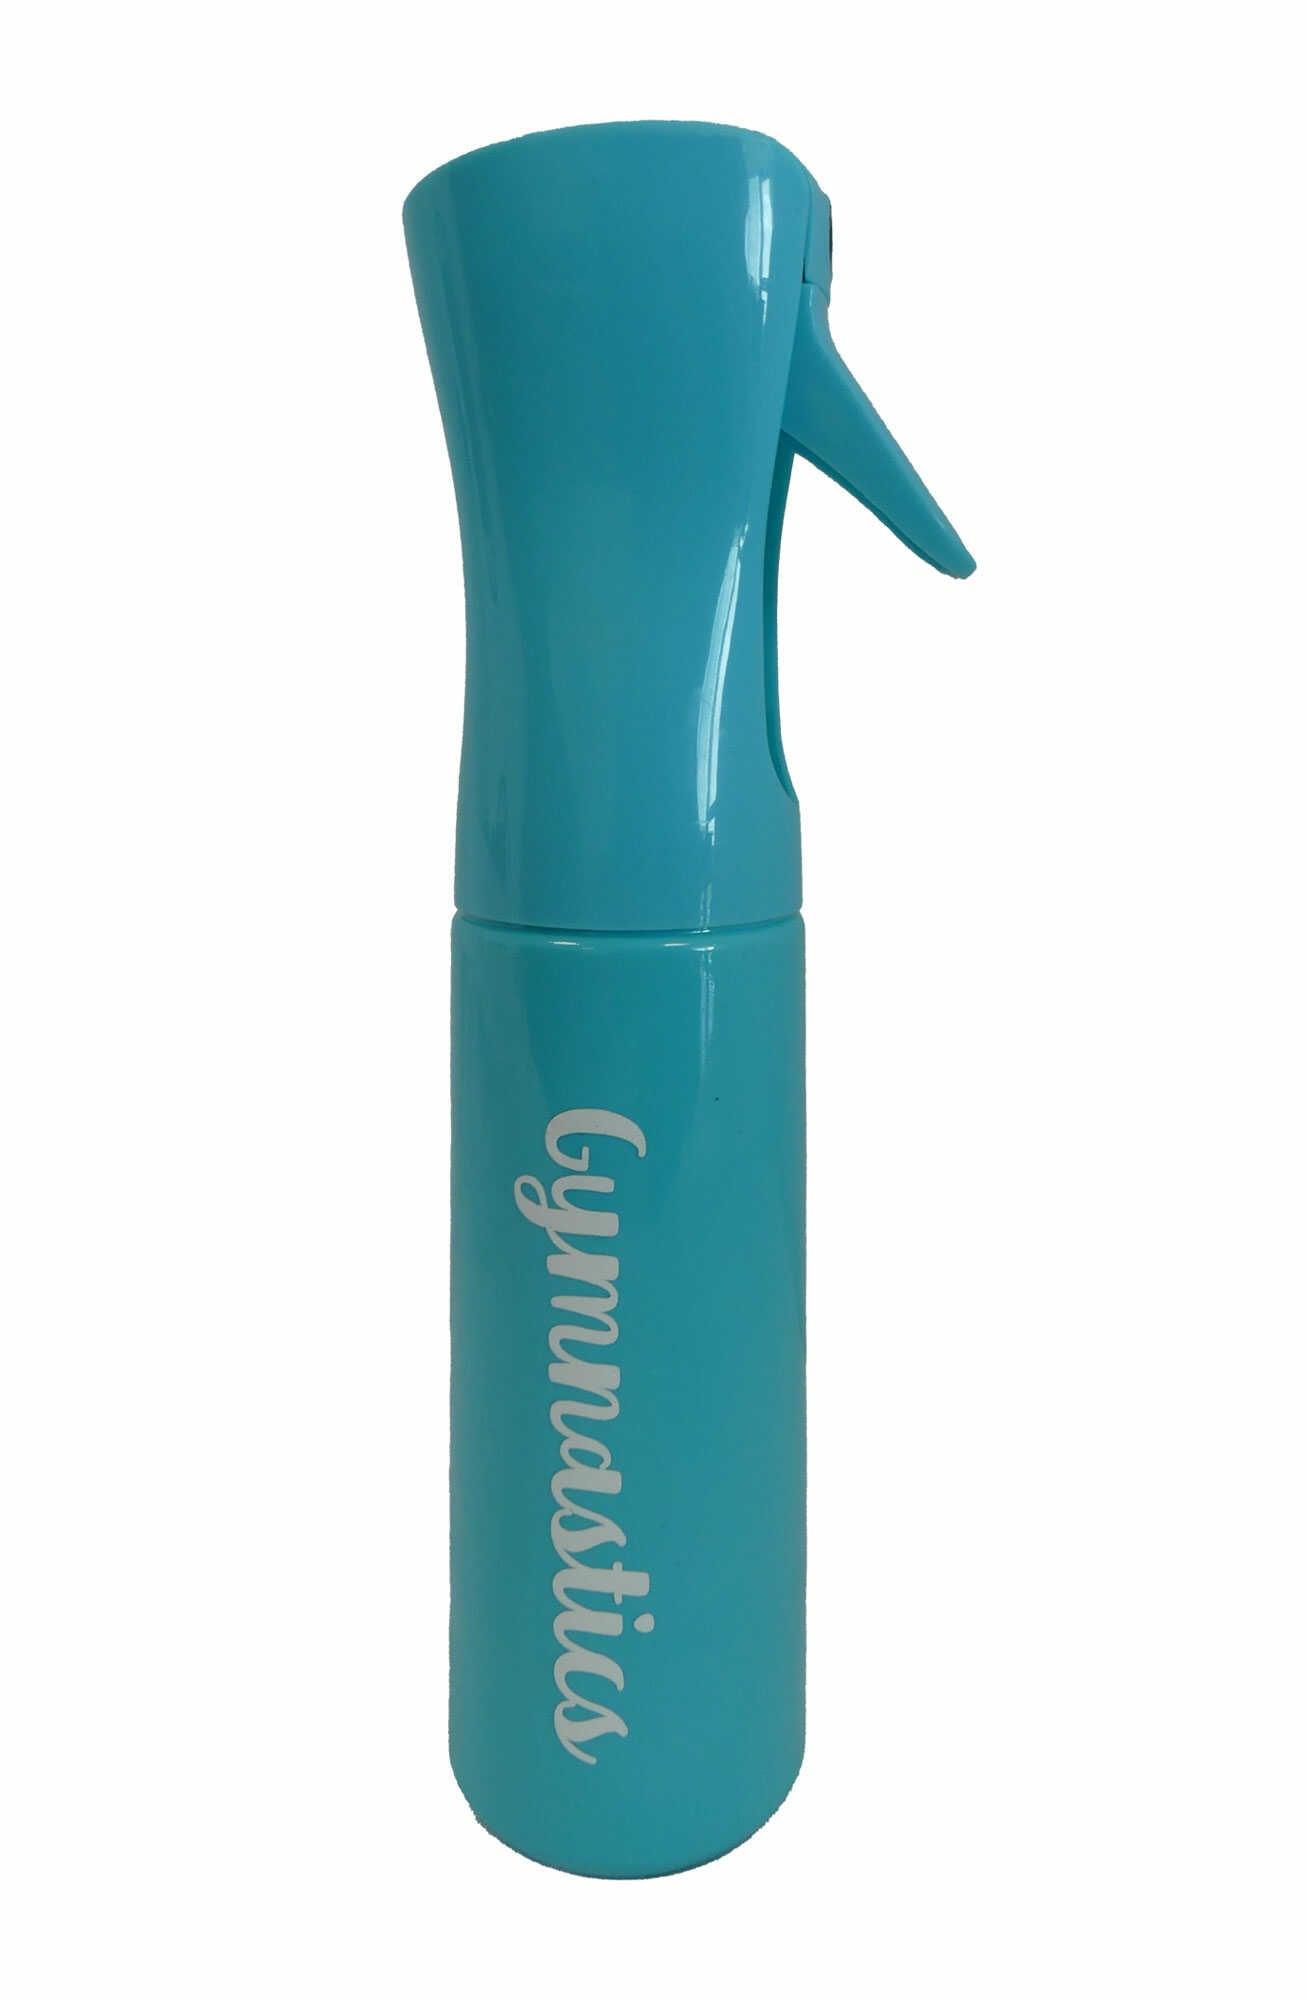 Water spray bottle with name